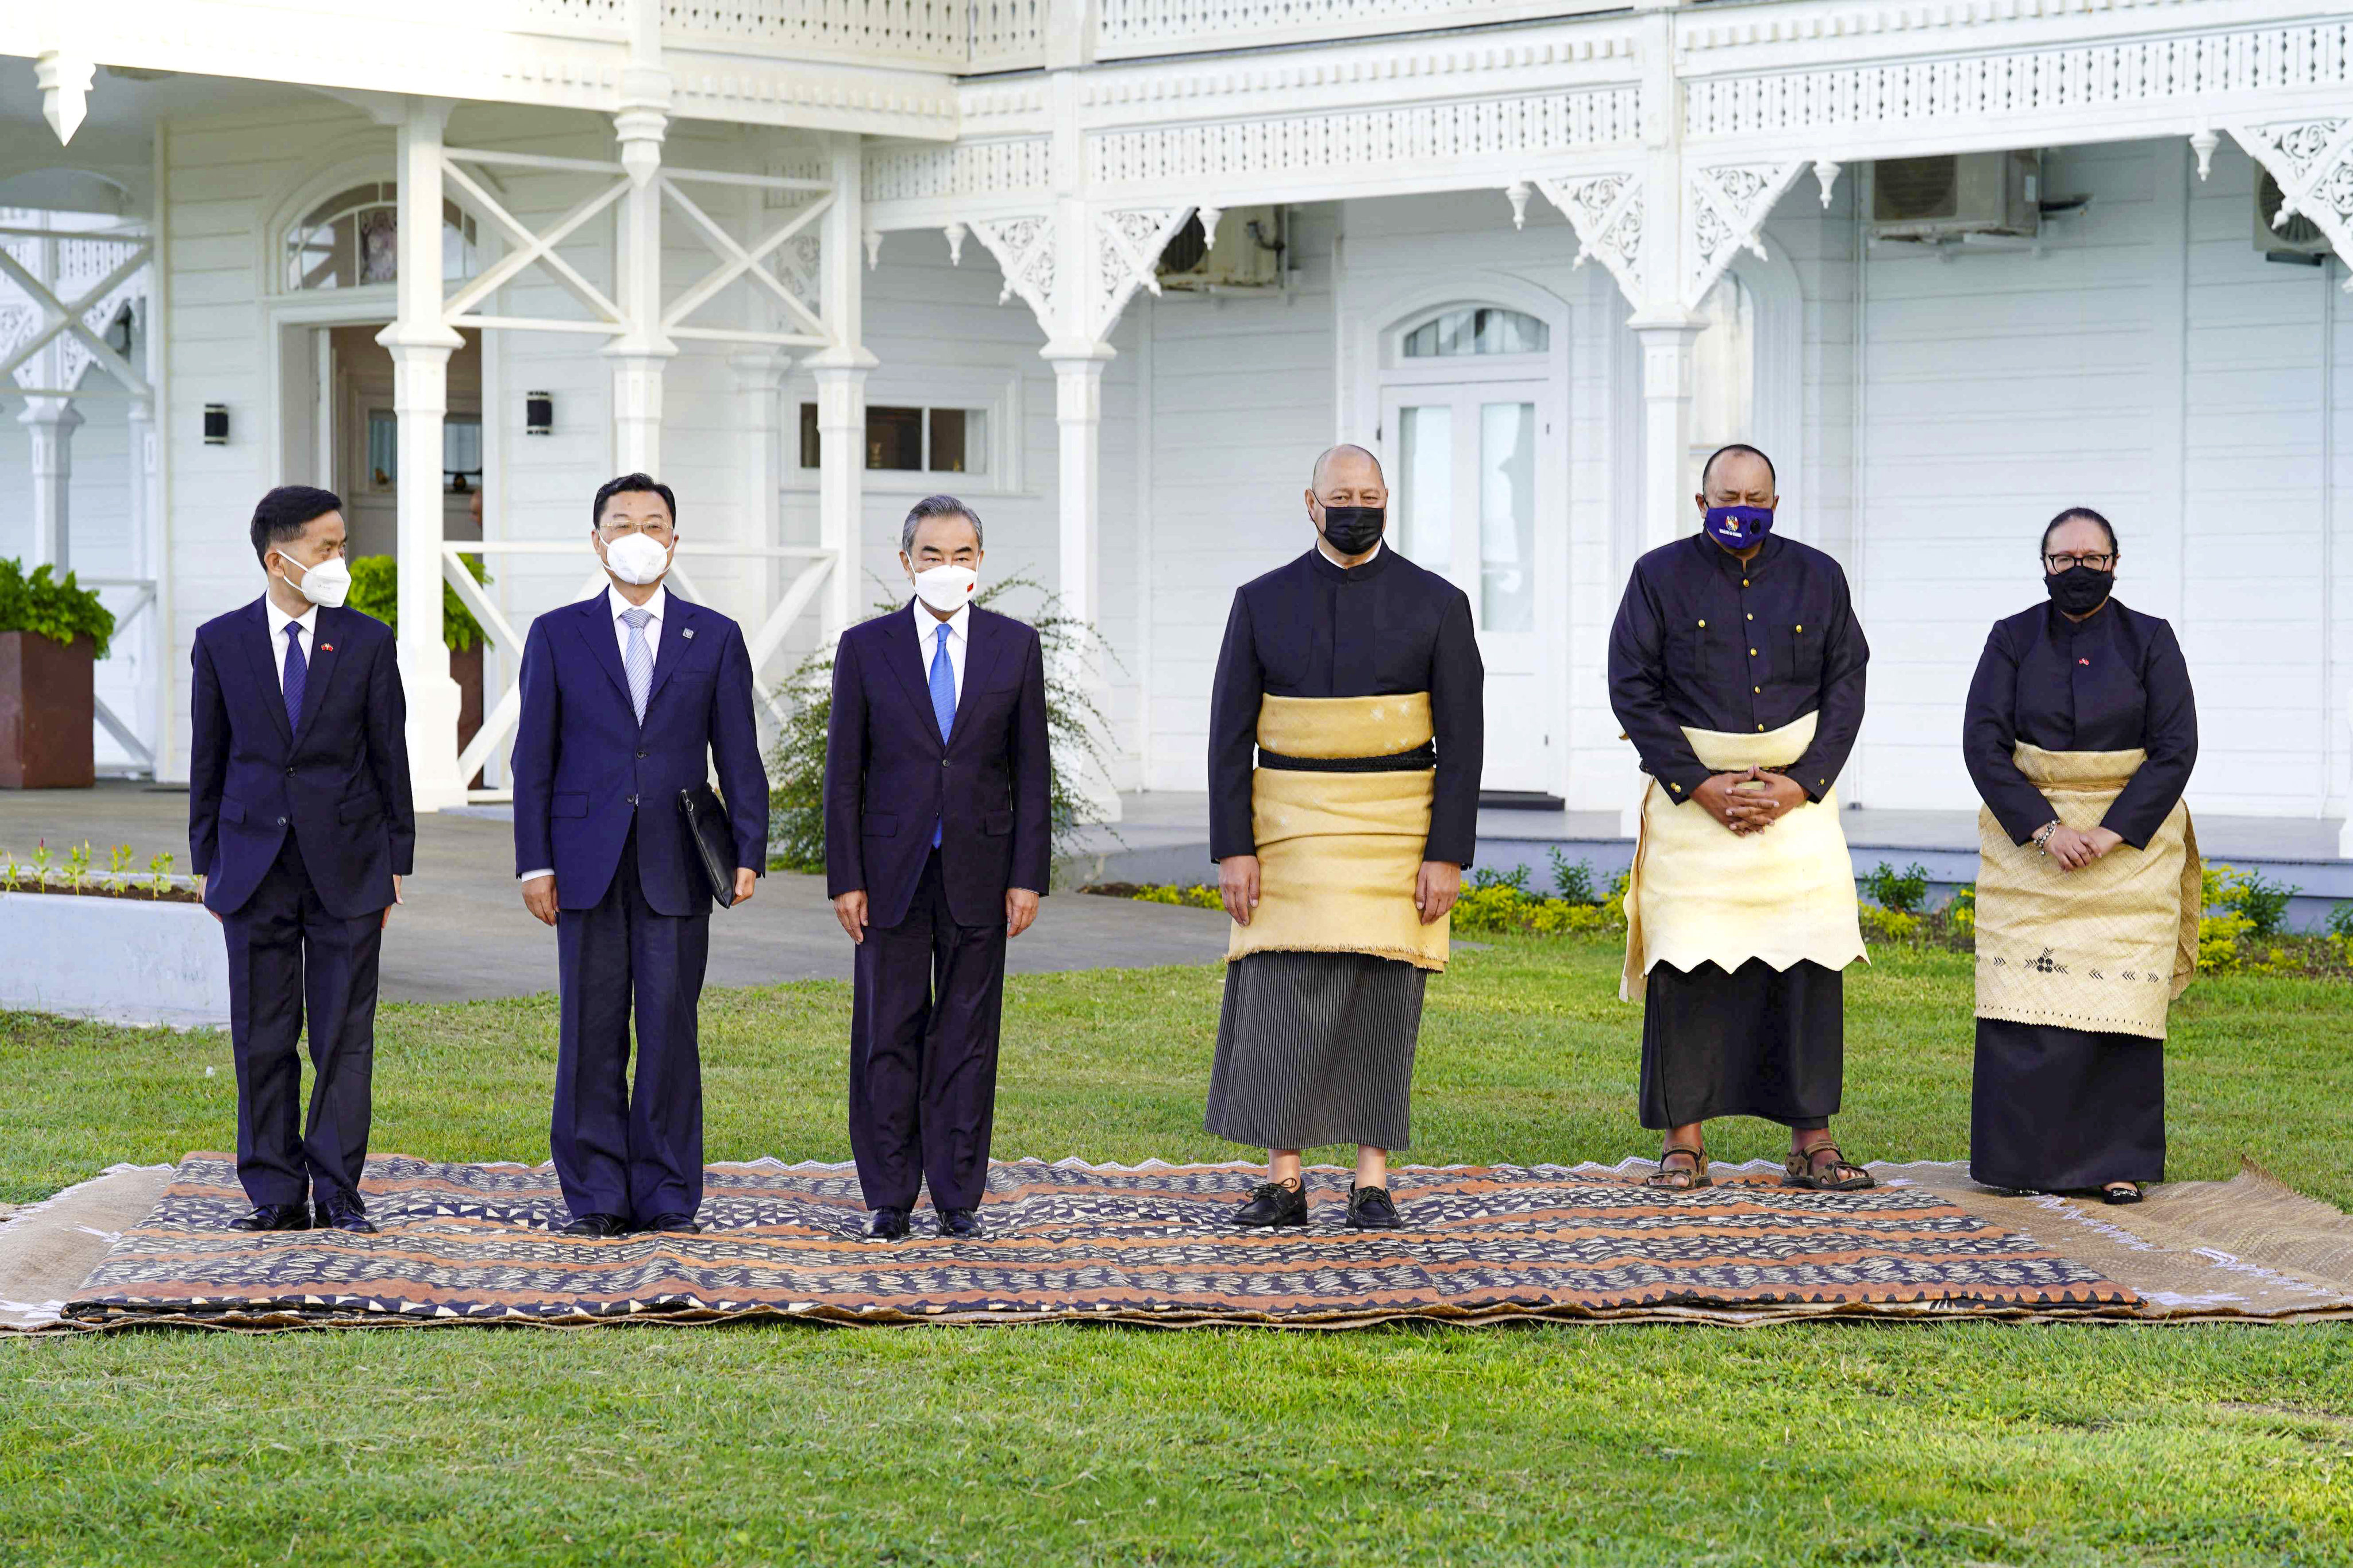 
King Tupou VI of Tonga (third from right) and Chinese Foreign Minister Wang Yi (third from left) at the Royal Palace Nukualofa on Tuesday. Photo: AFP